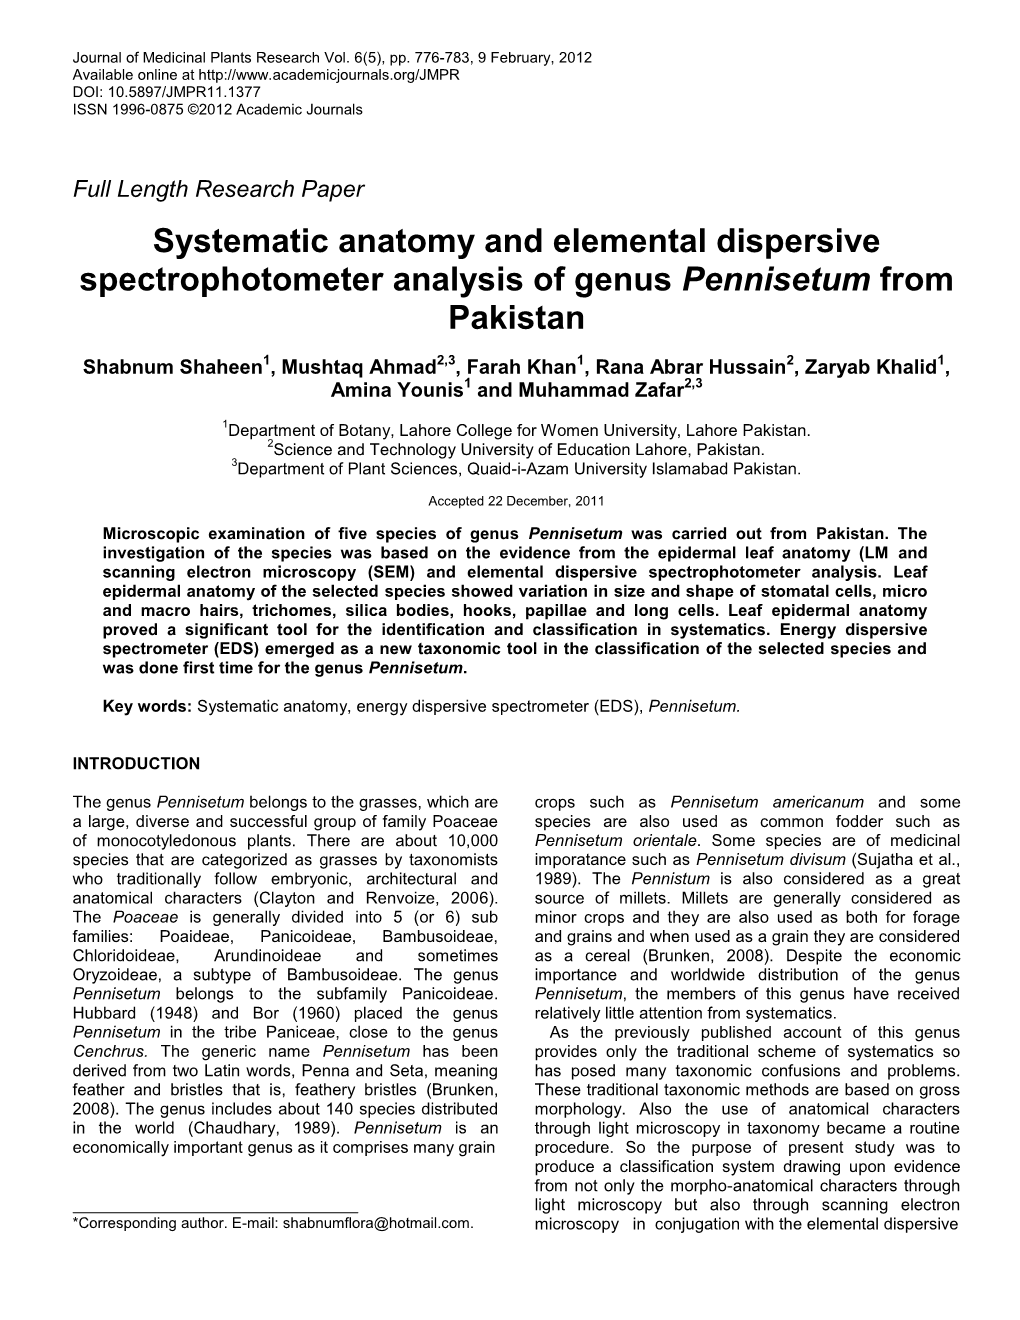 Systematic Anatomy and Elemental Dispersive Spectrophotometer Analysis of Genus Pennisetum from Pakistan